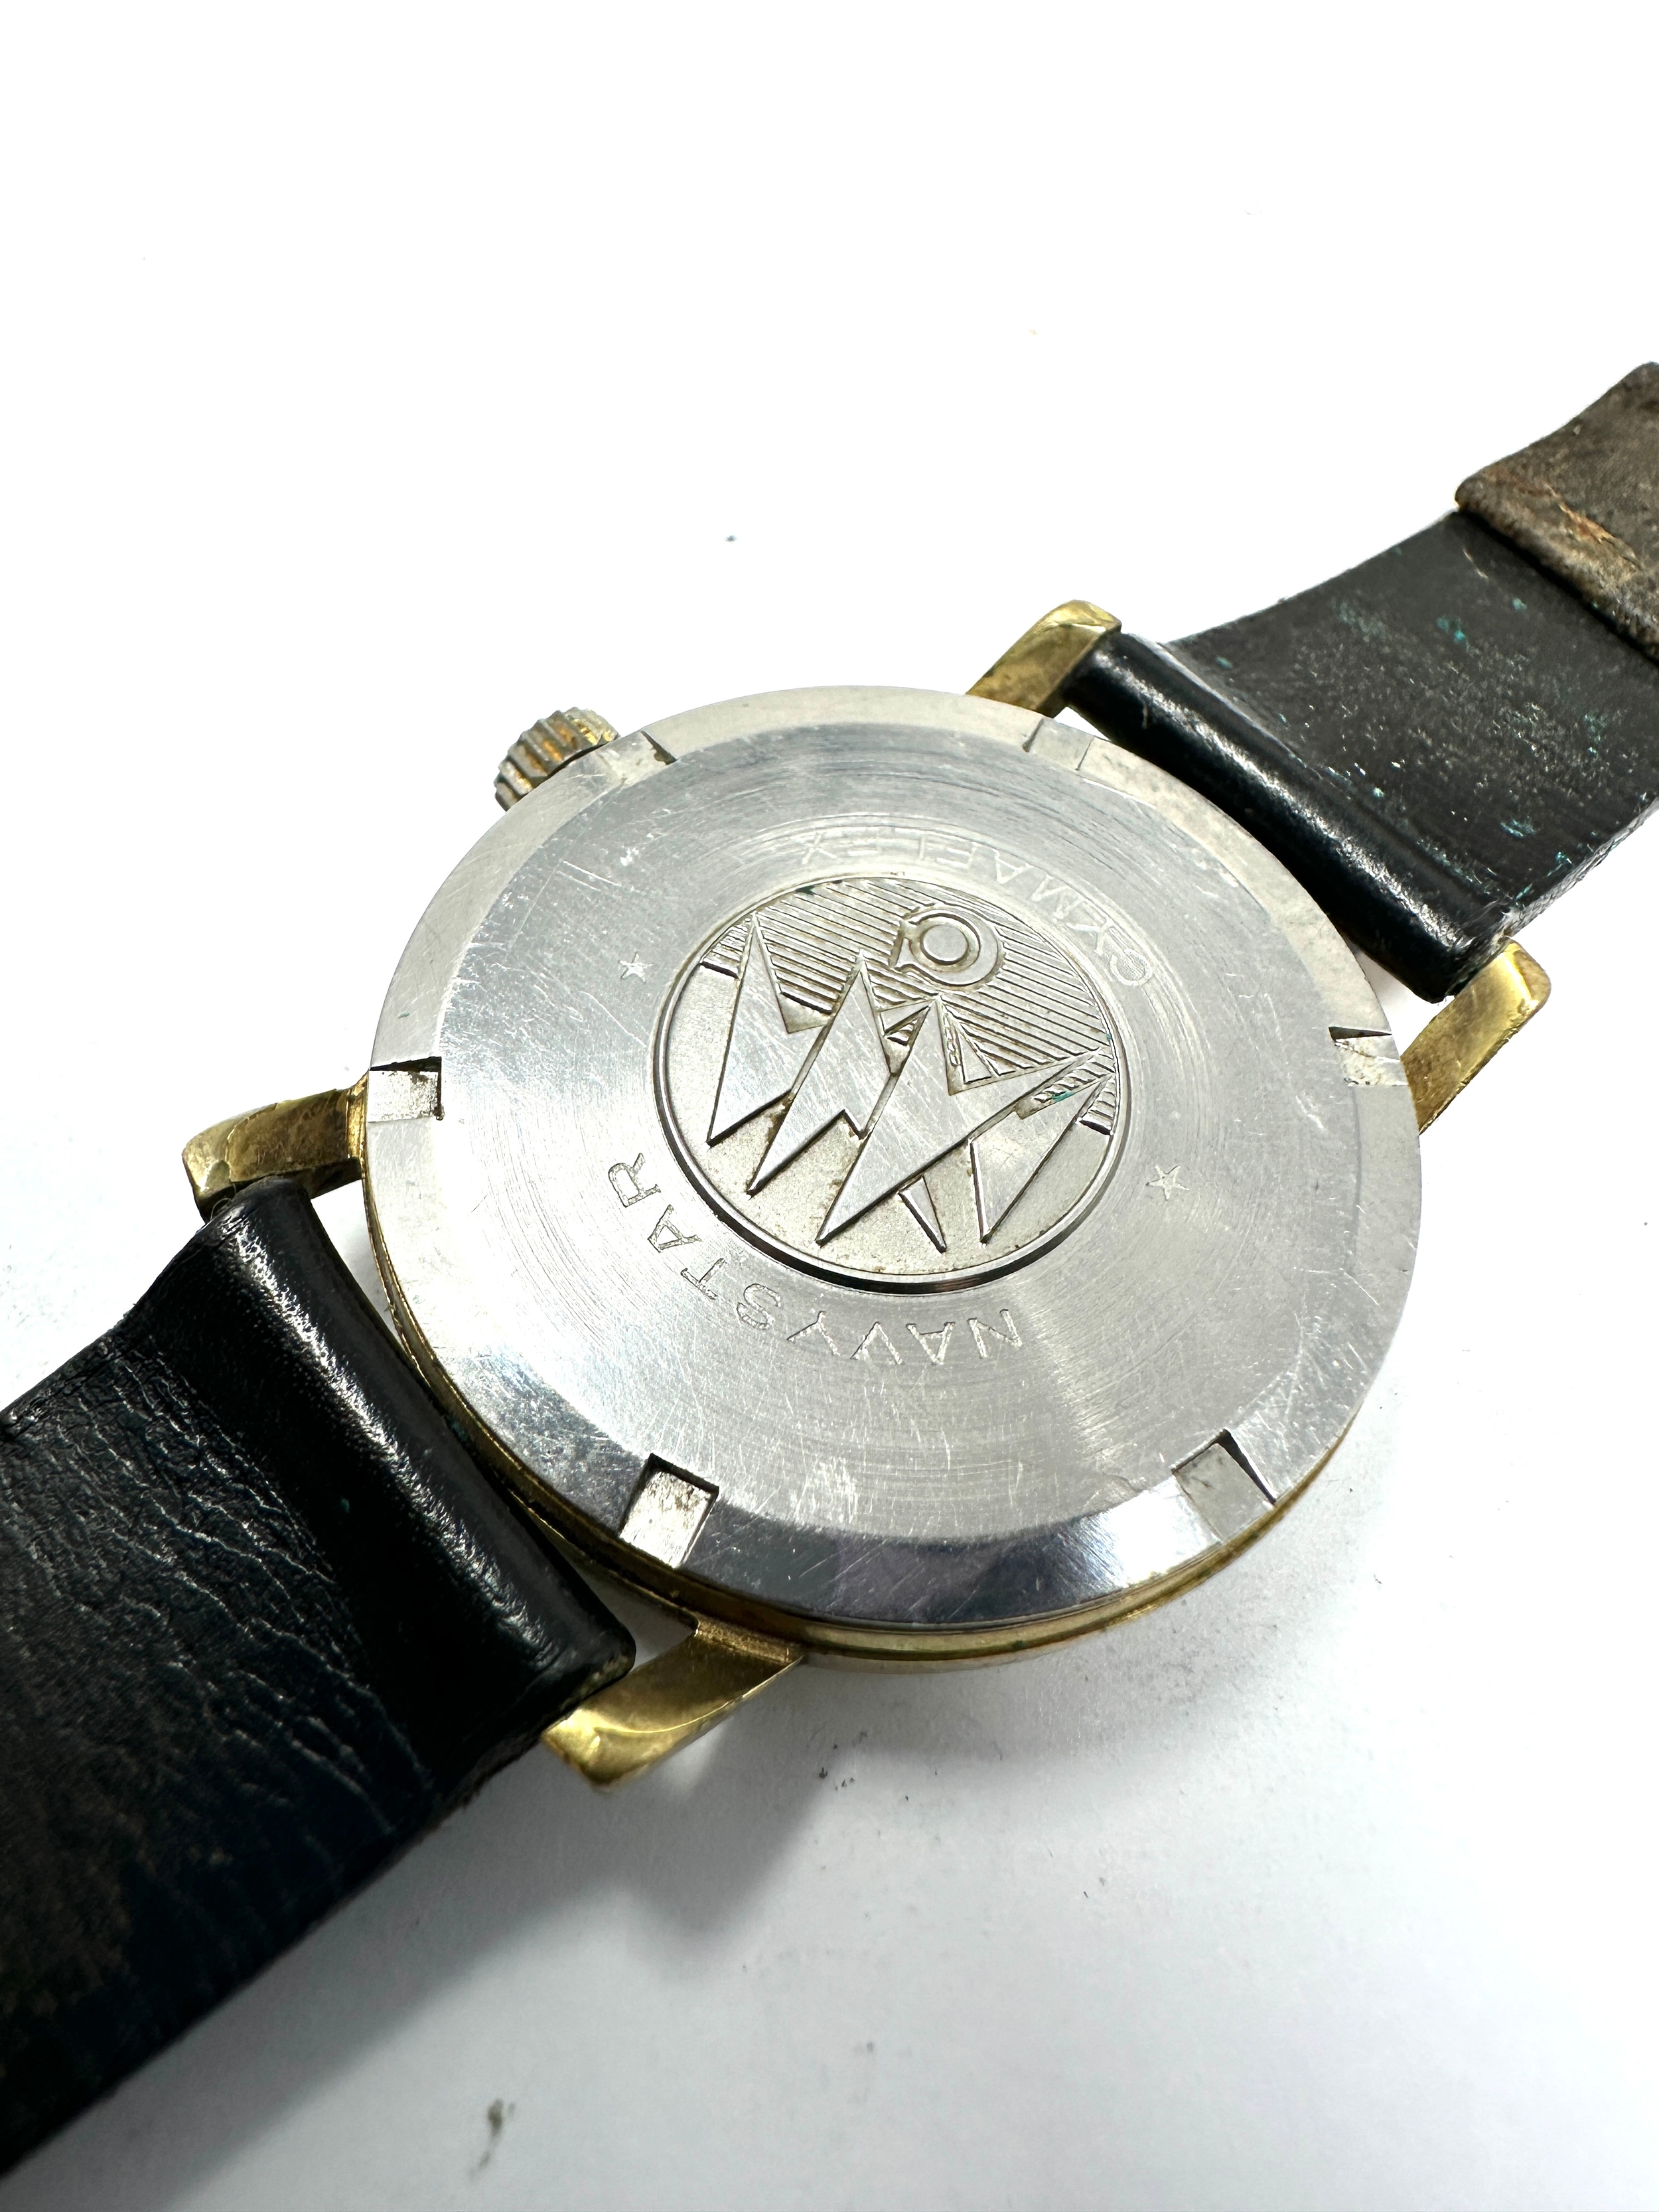 Vintage Cyma navystar gents wristwatch the watch is ticking - Image 3 of 4